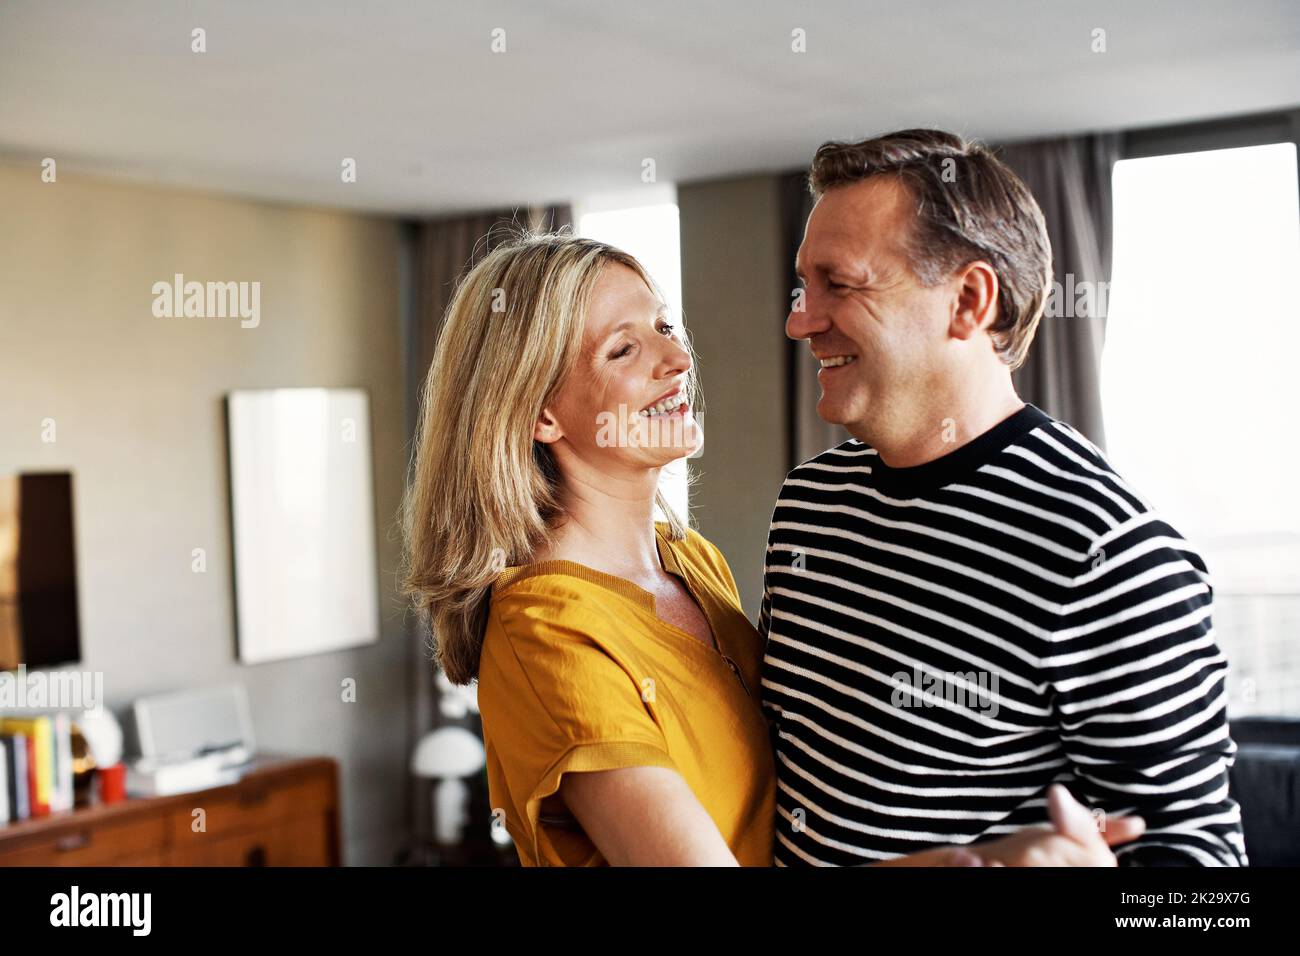 We were meant to dance together forever. Shot of a happy mature couple dancing together in their living room. Stock Photo